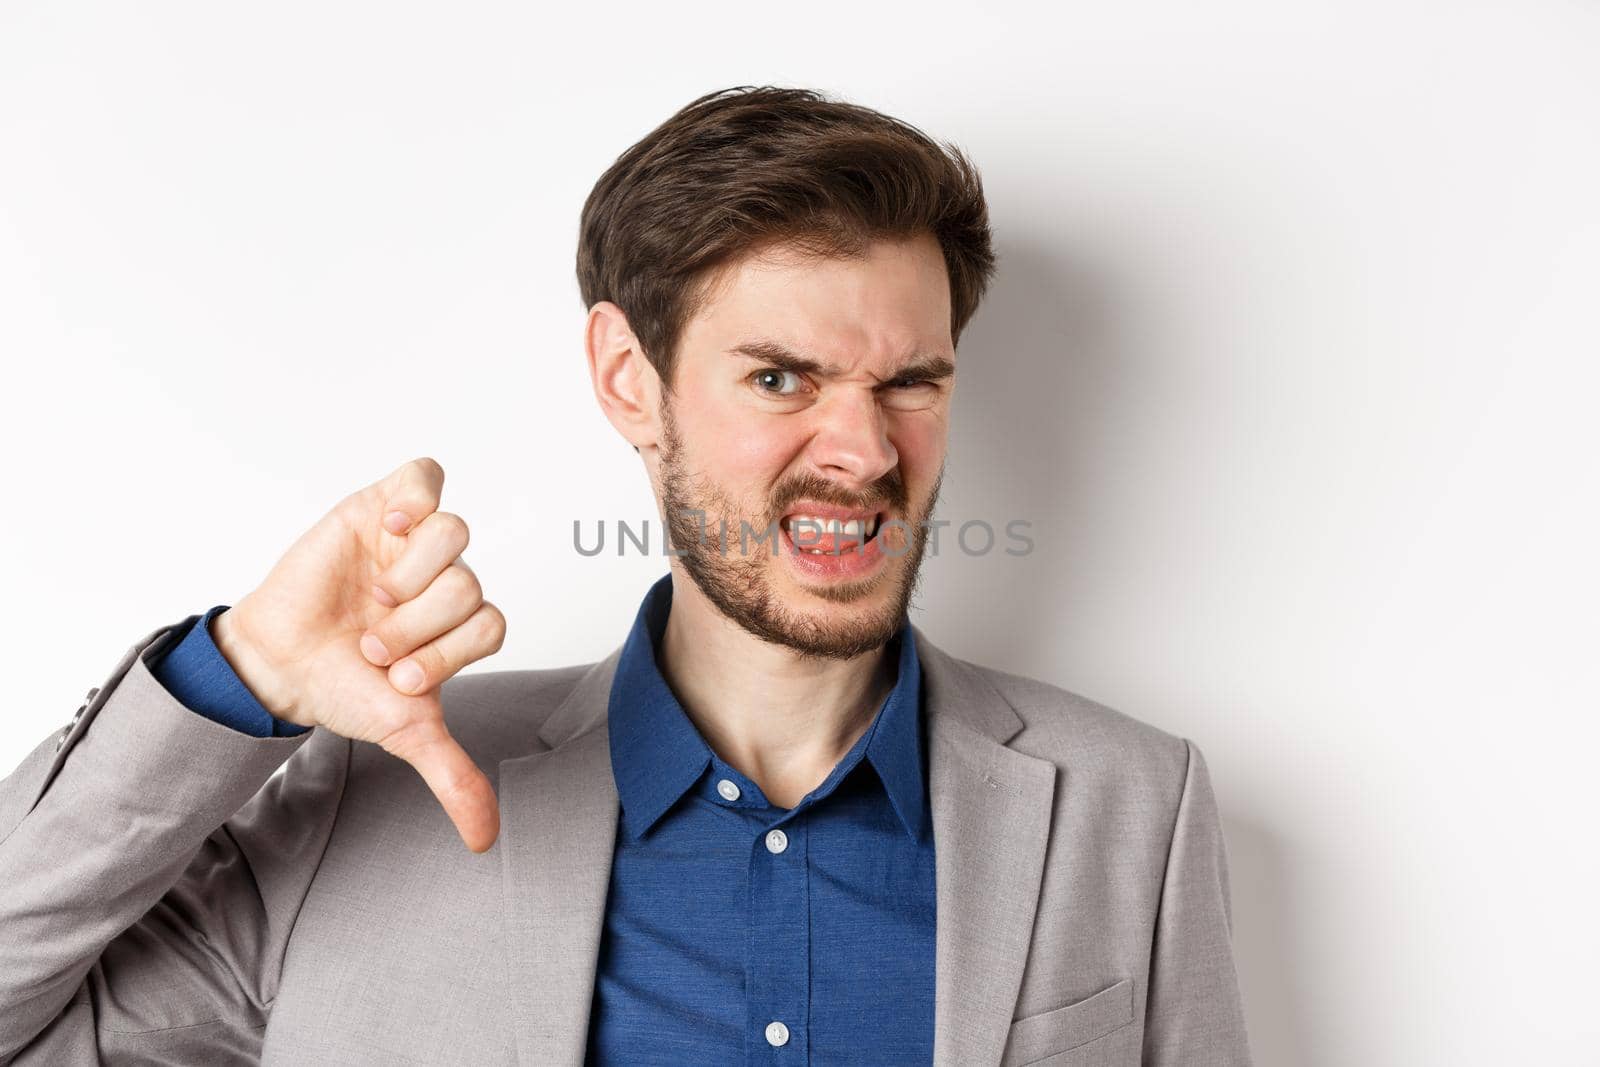 Close-up of disgusted guy in suit grimacing upset, showing thumbs down, express negative emotion, white background.